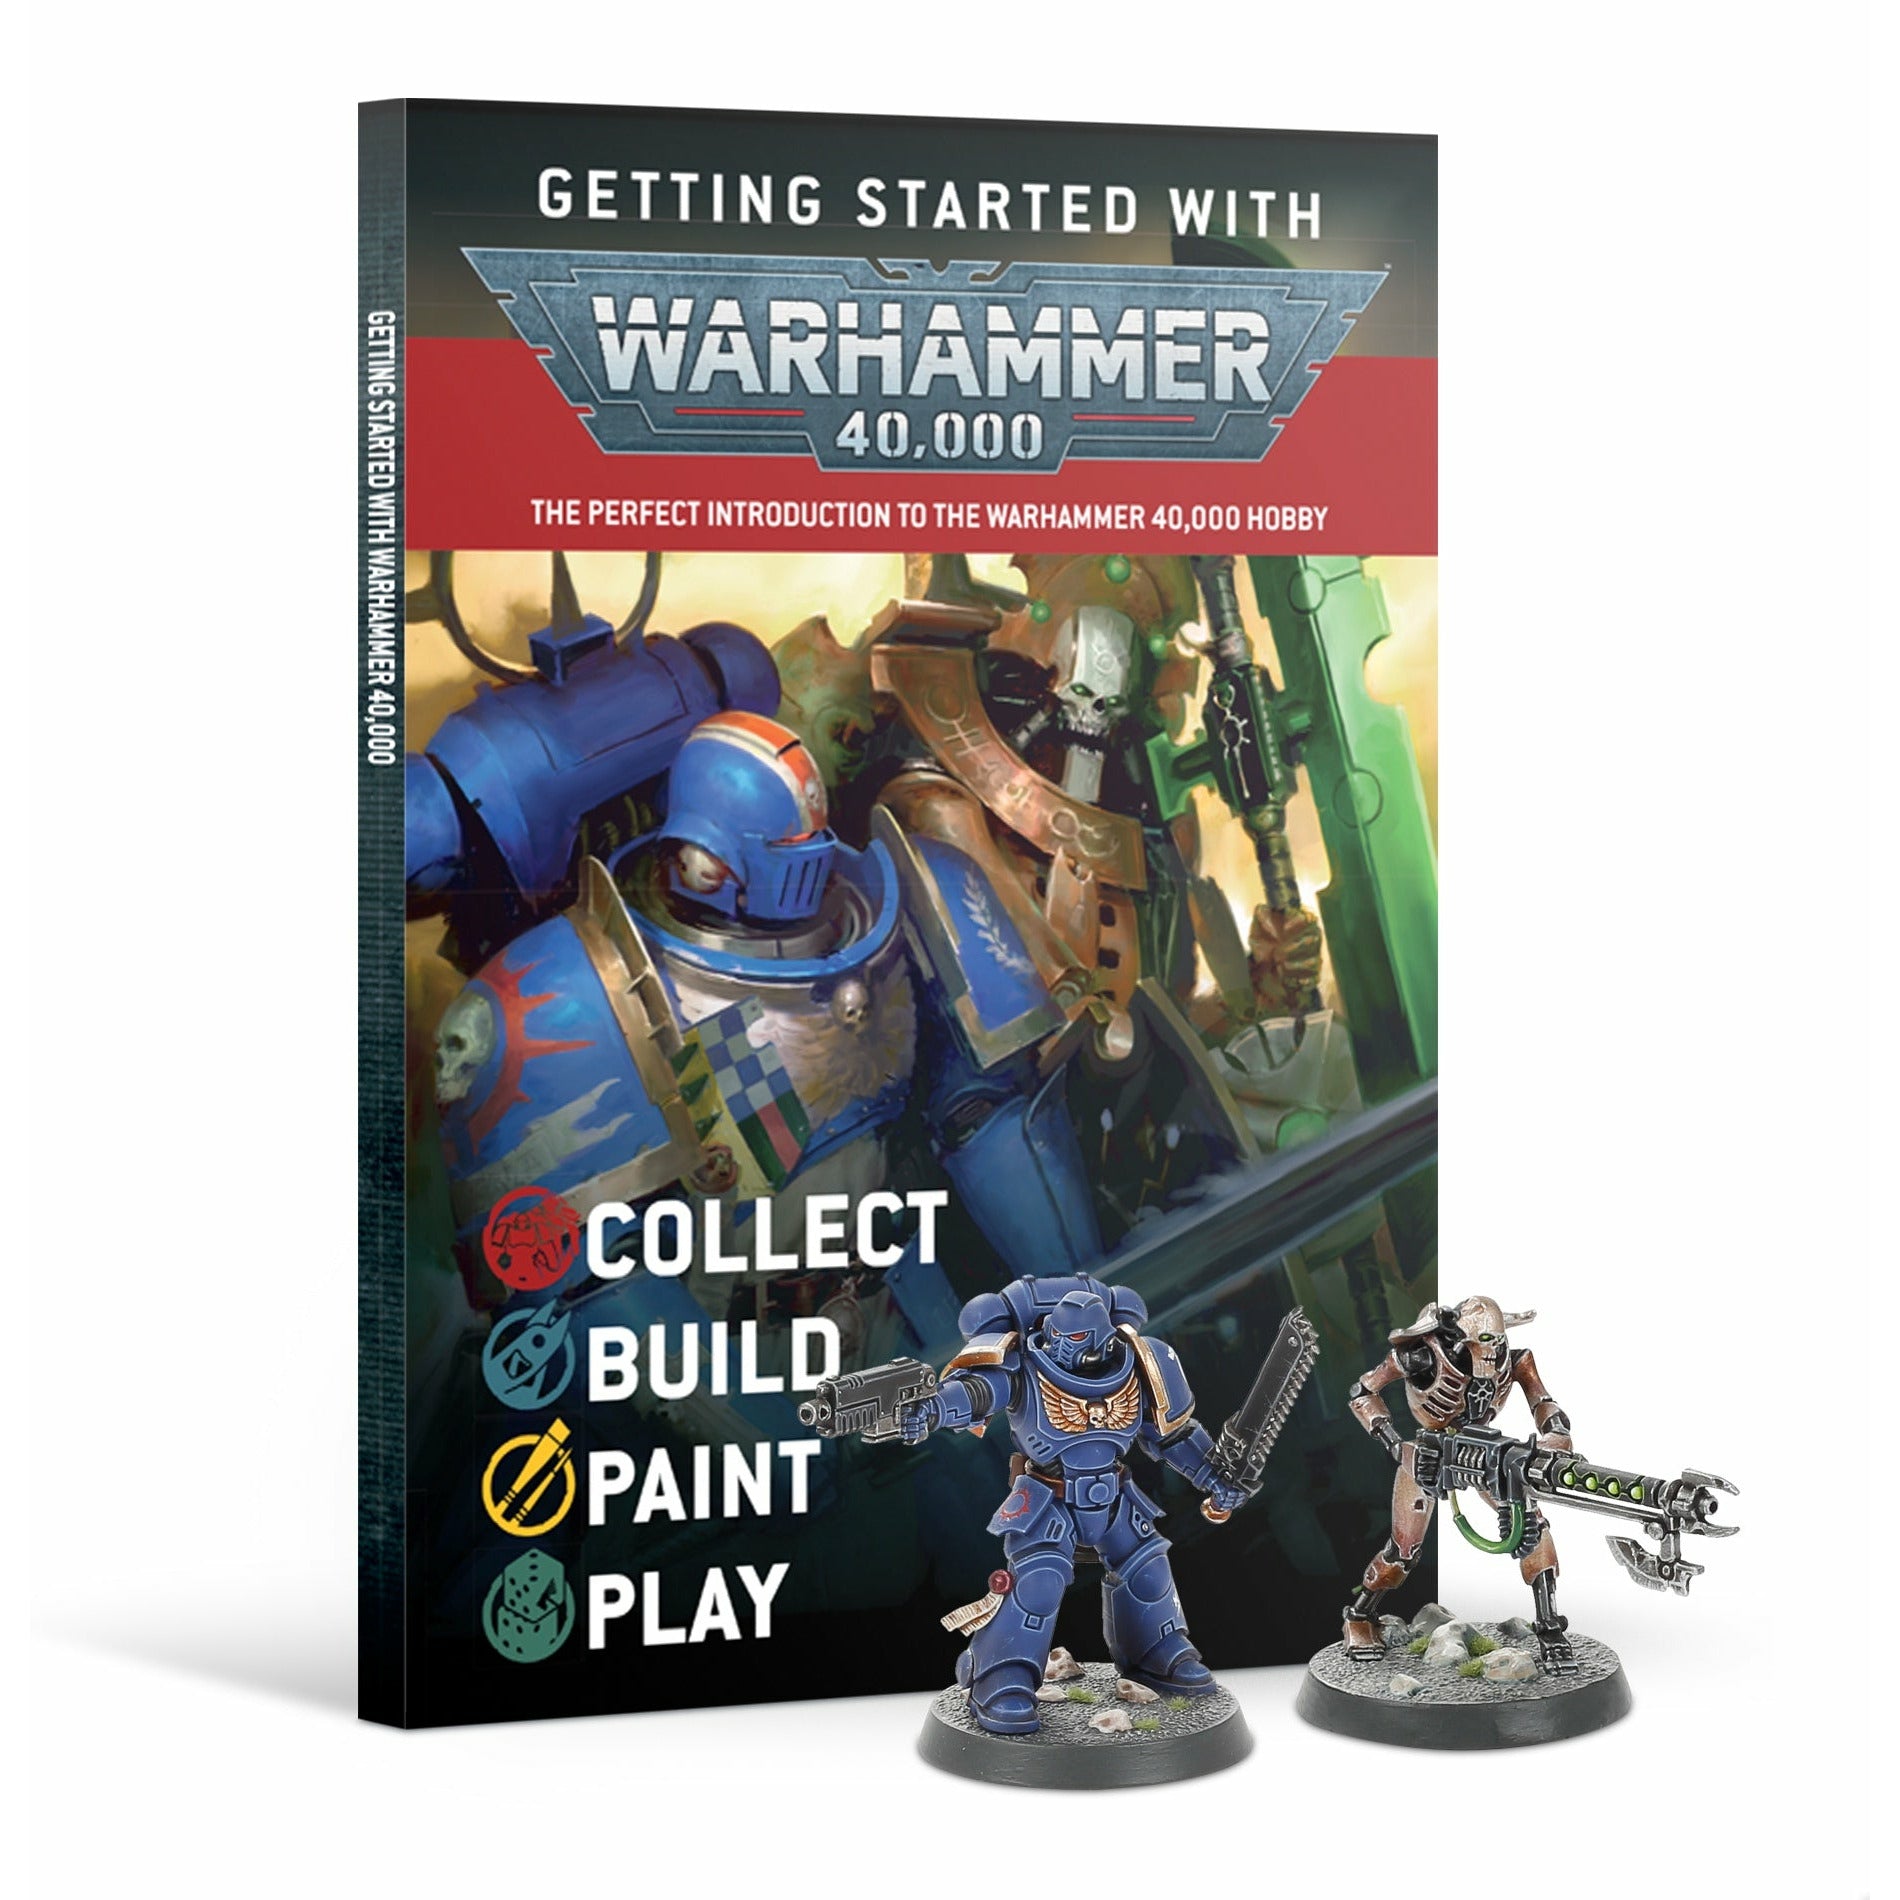 Getting Started with Warhammer 40,000 (9th Edition)